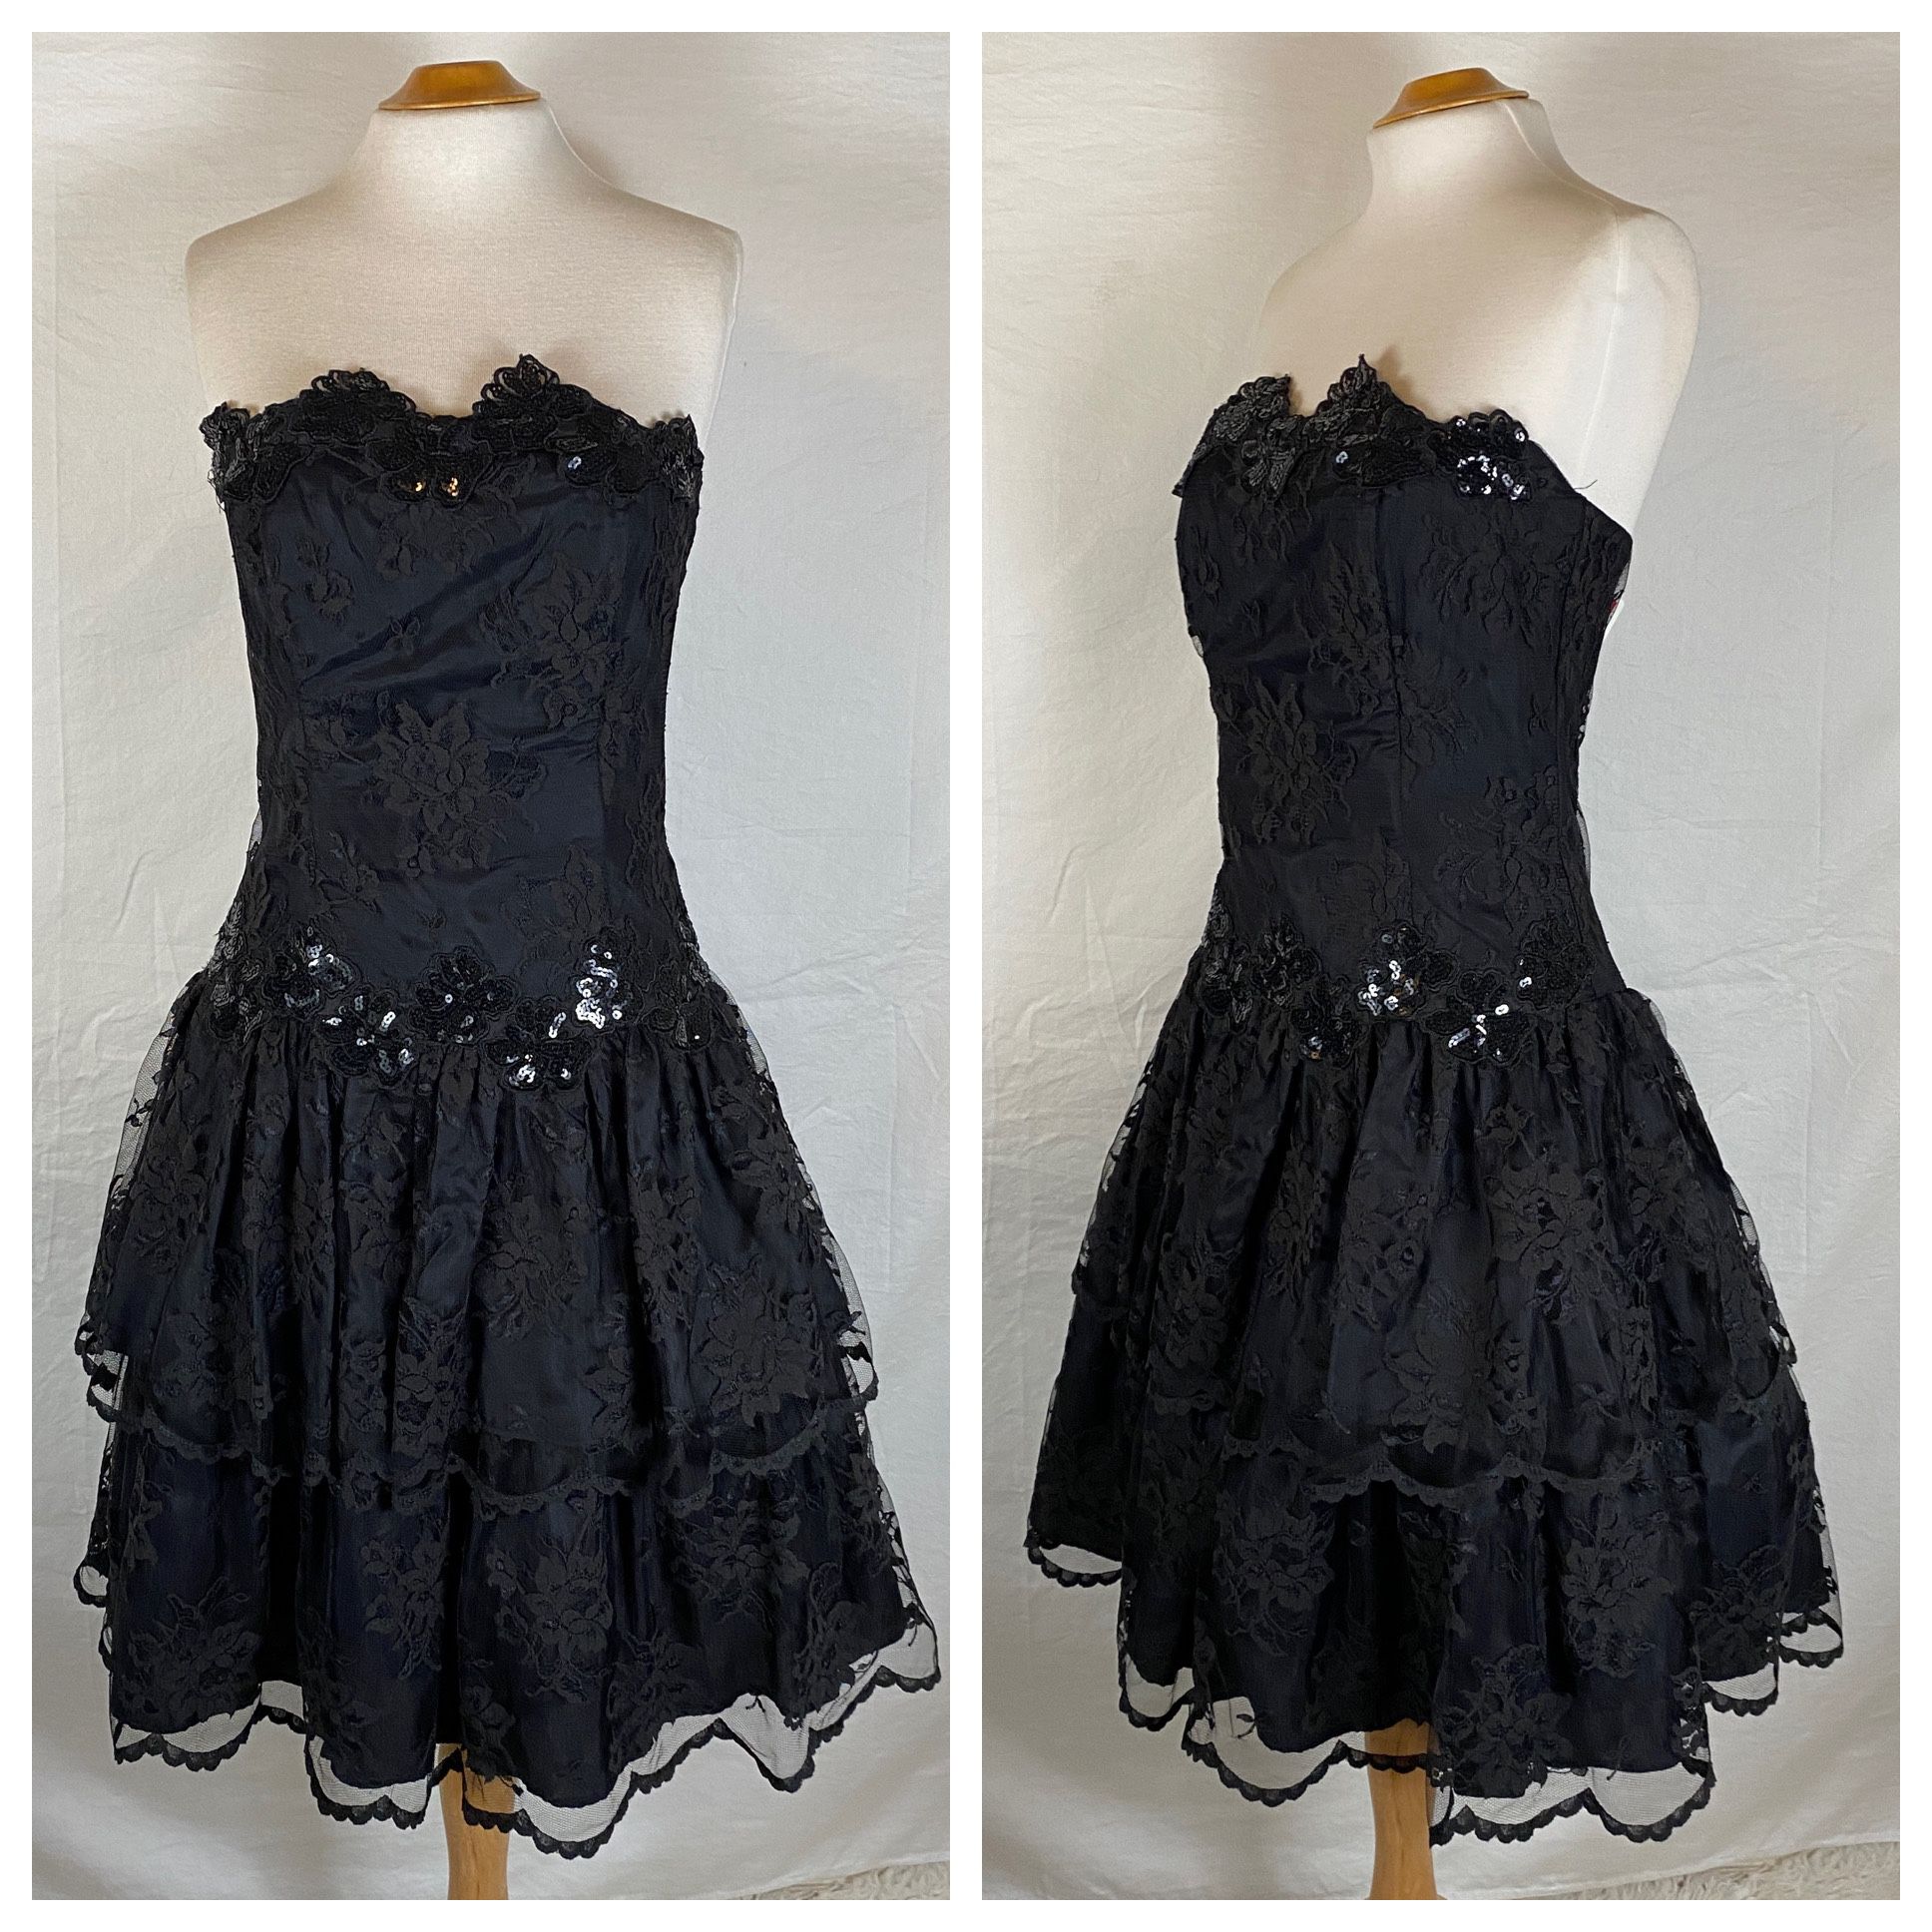 Vintage 80s Black Lace Prom Party Dress Strapless Full Skirt Goth USA Made Sz 10